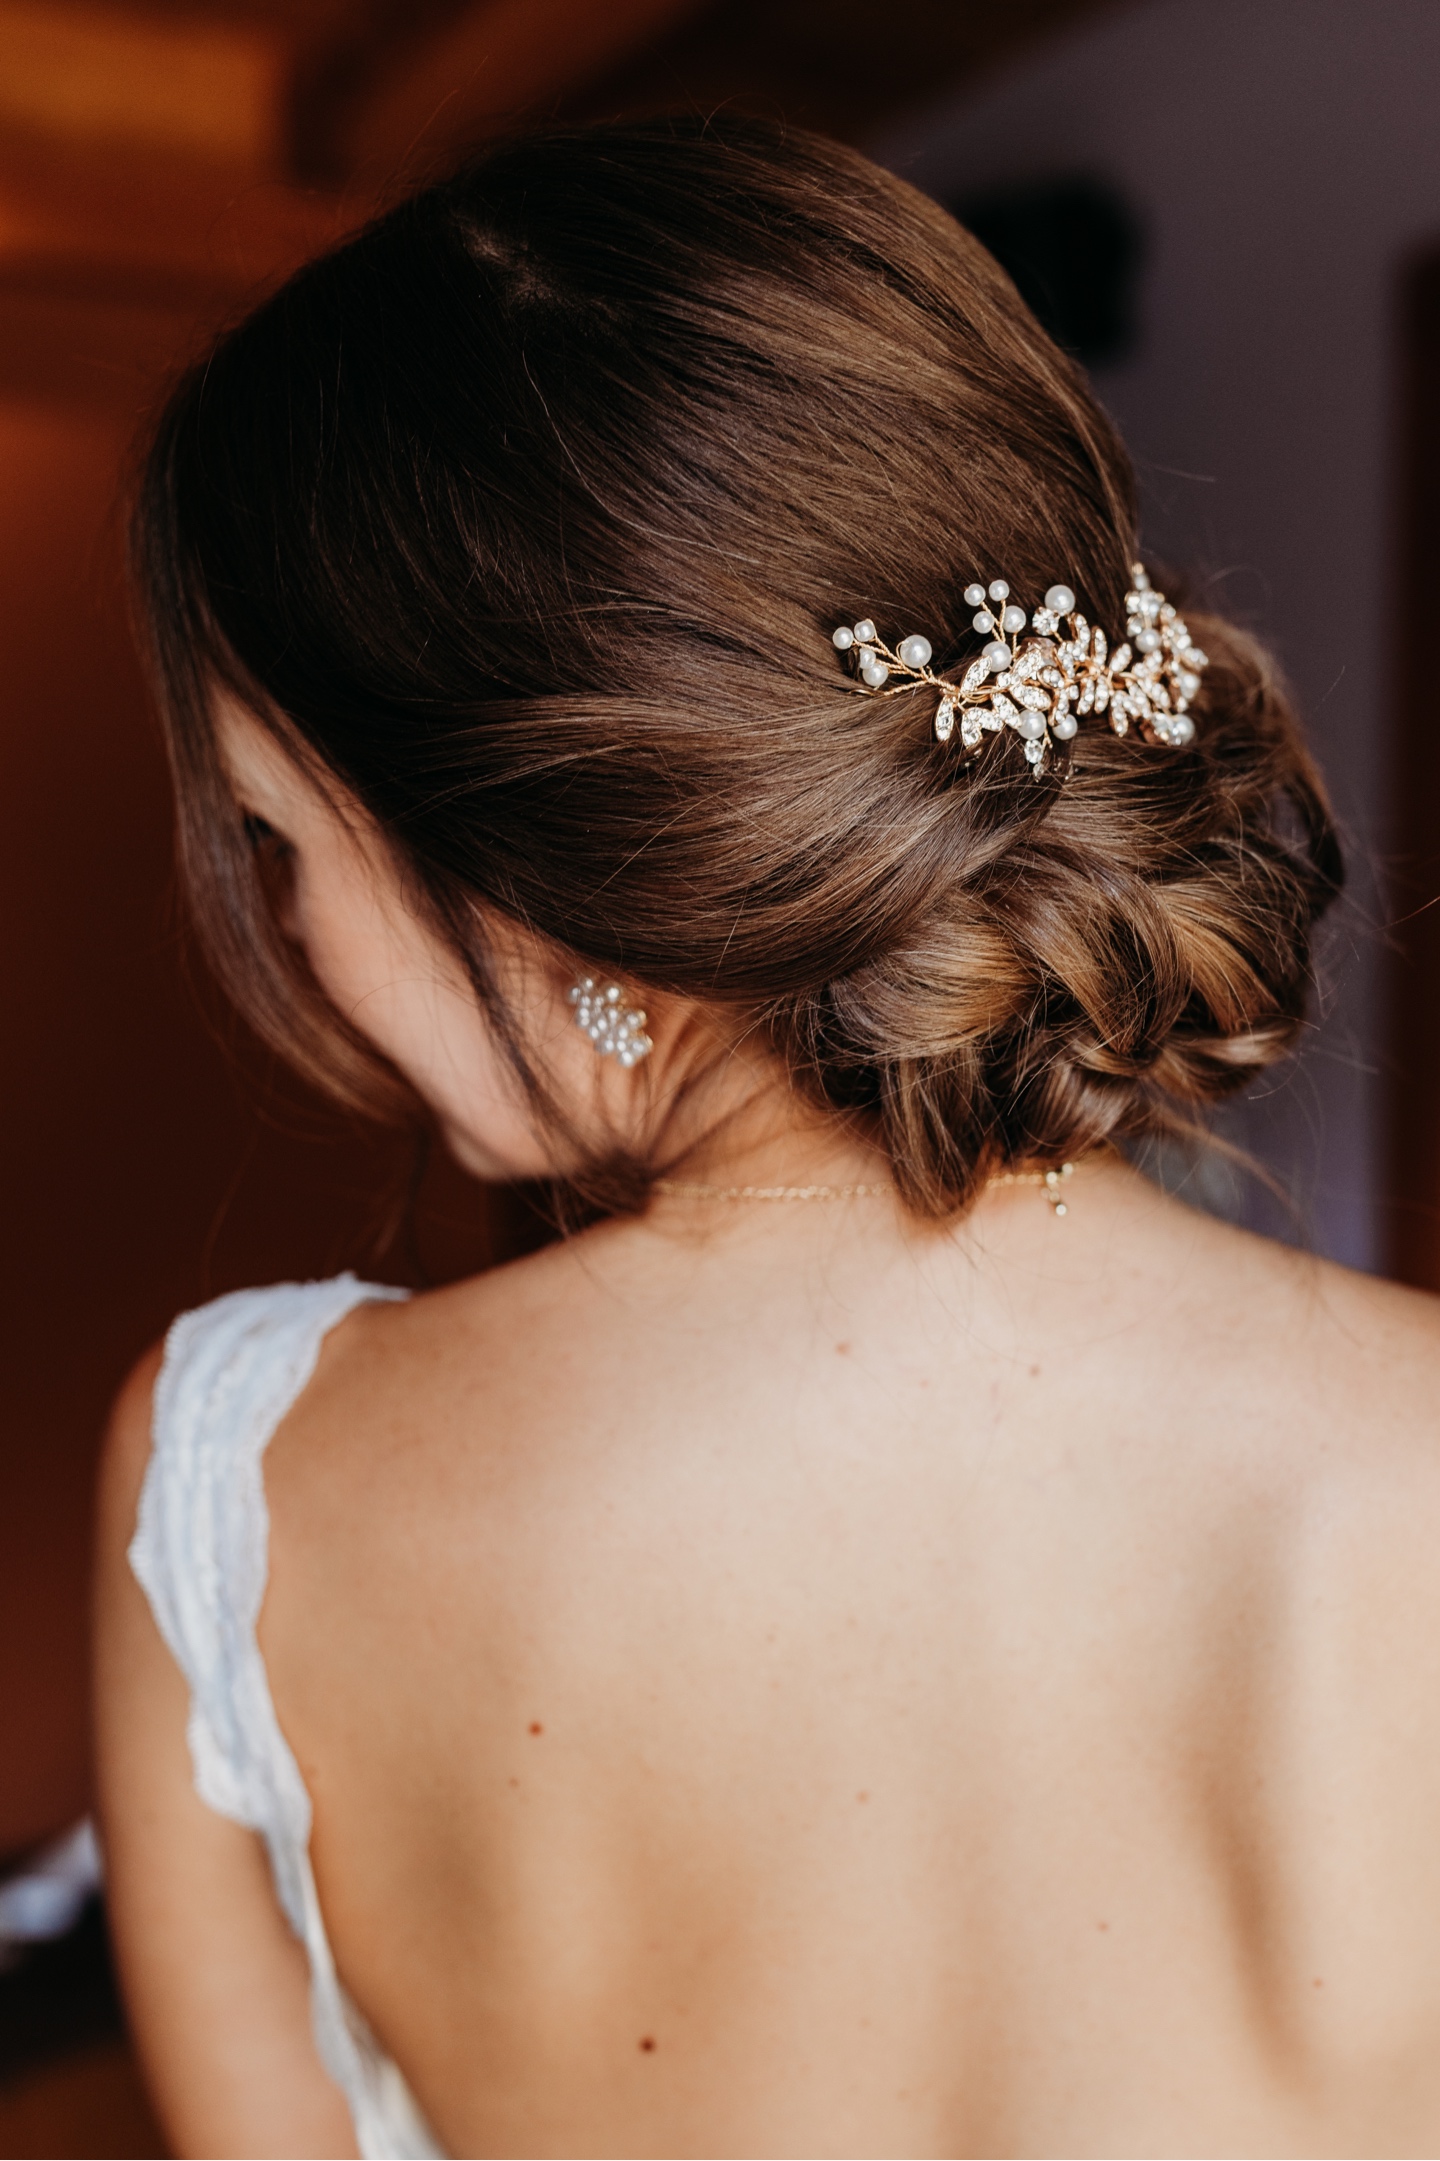 Close up of the brides hair as she looks over her shoulder. Sacramento wedding photography by Liz Koston.